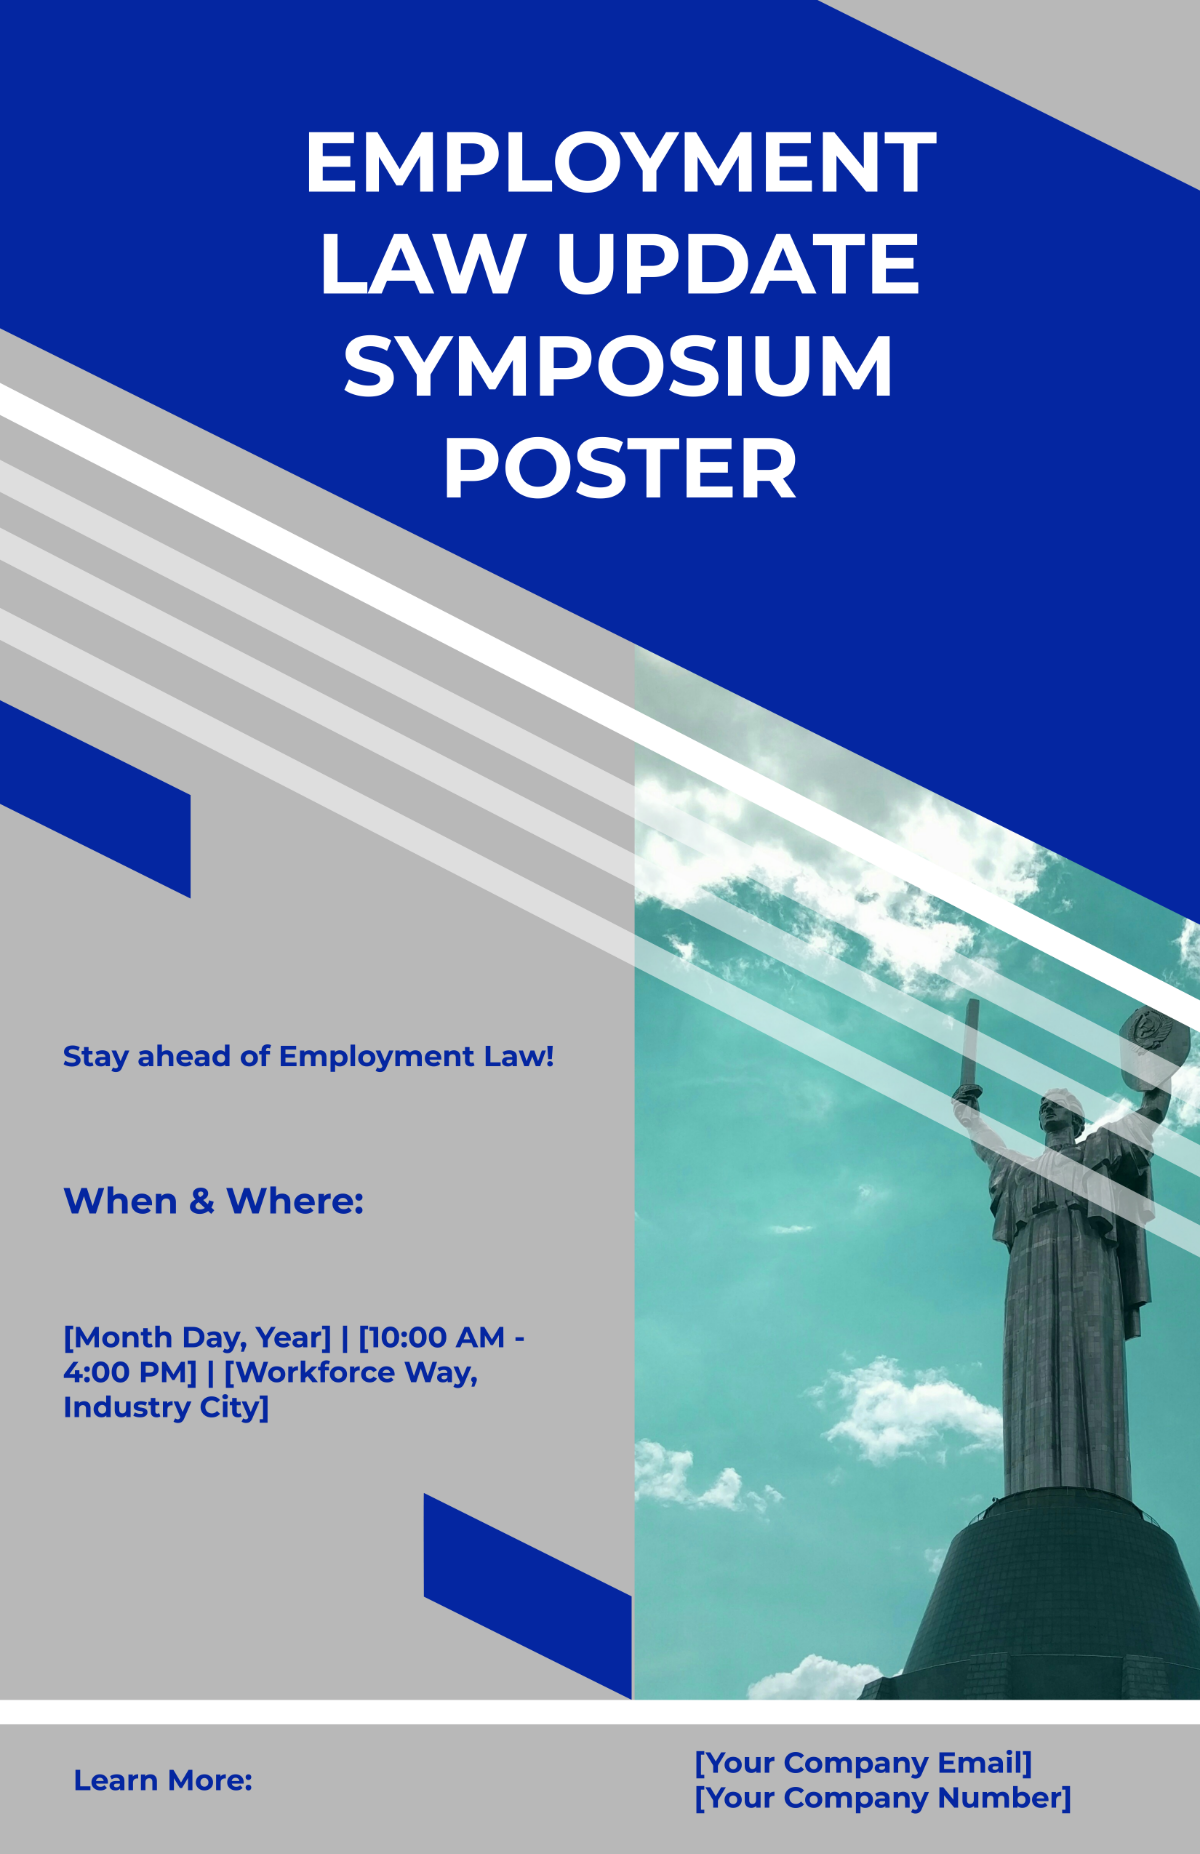 Employment Law Update Symposium Poster Template